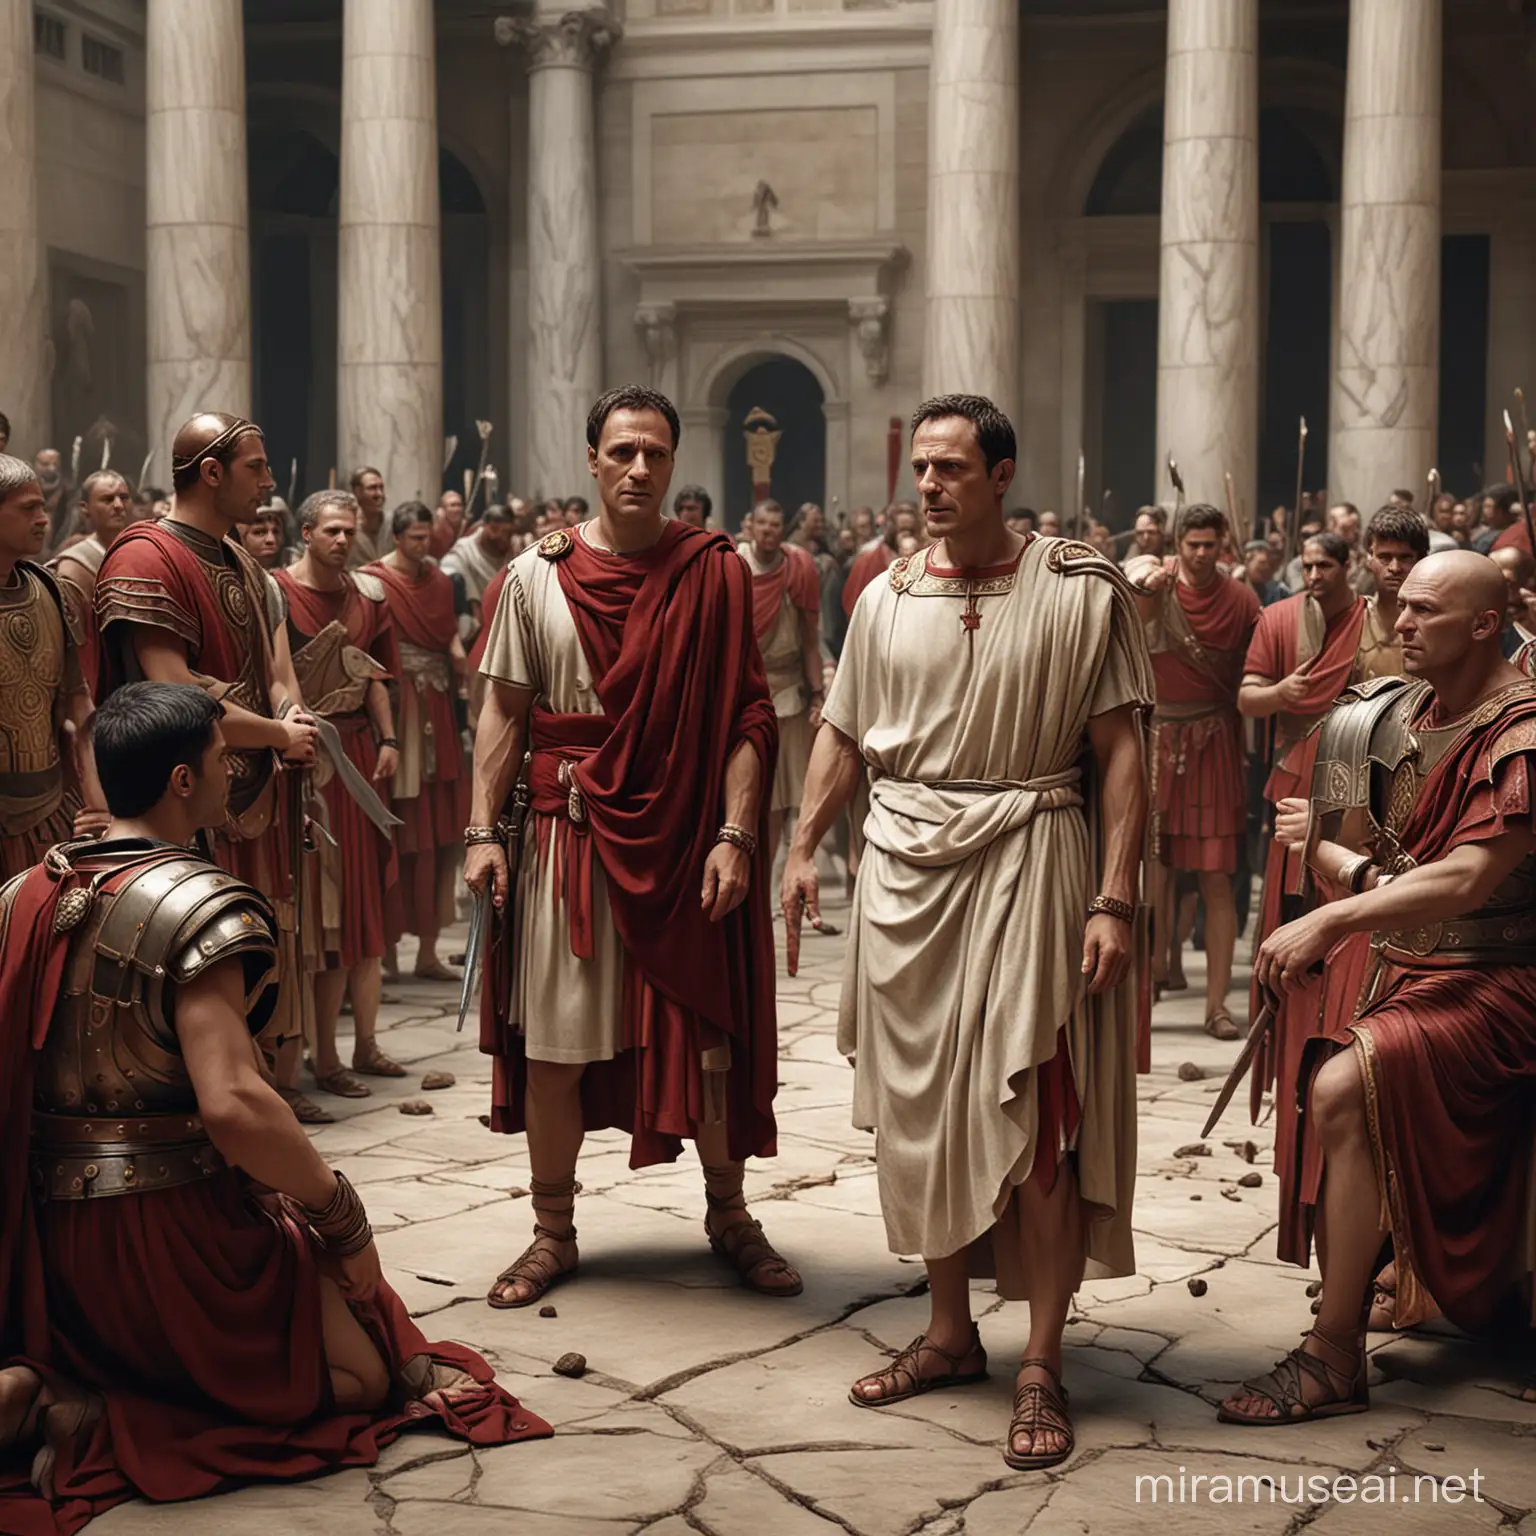 Image of Julius Caesar surrounded by Roman senators during the assassination. hyper realitic